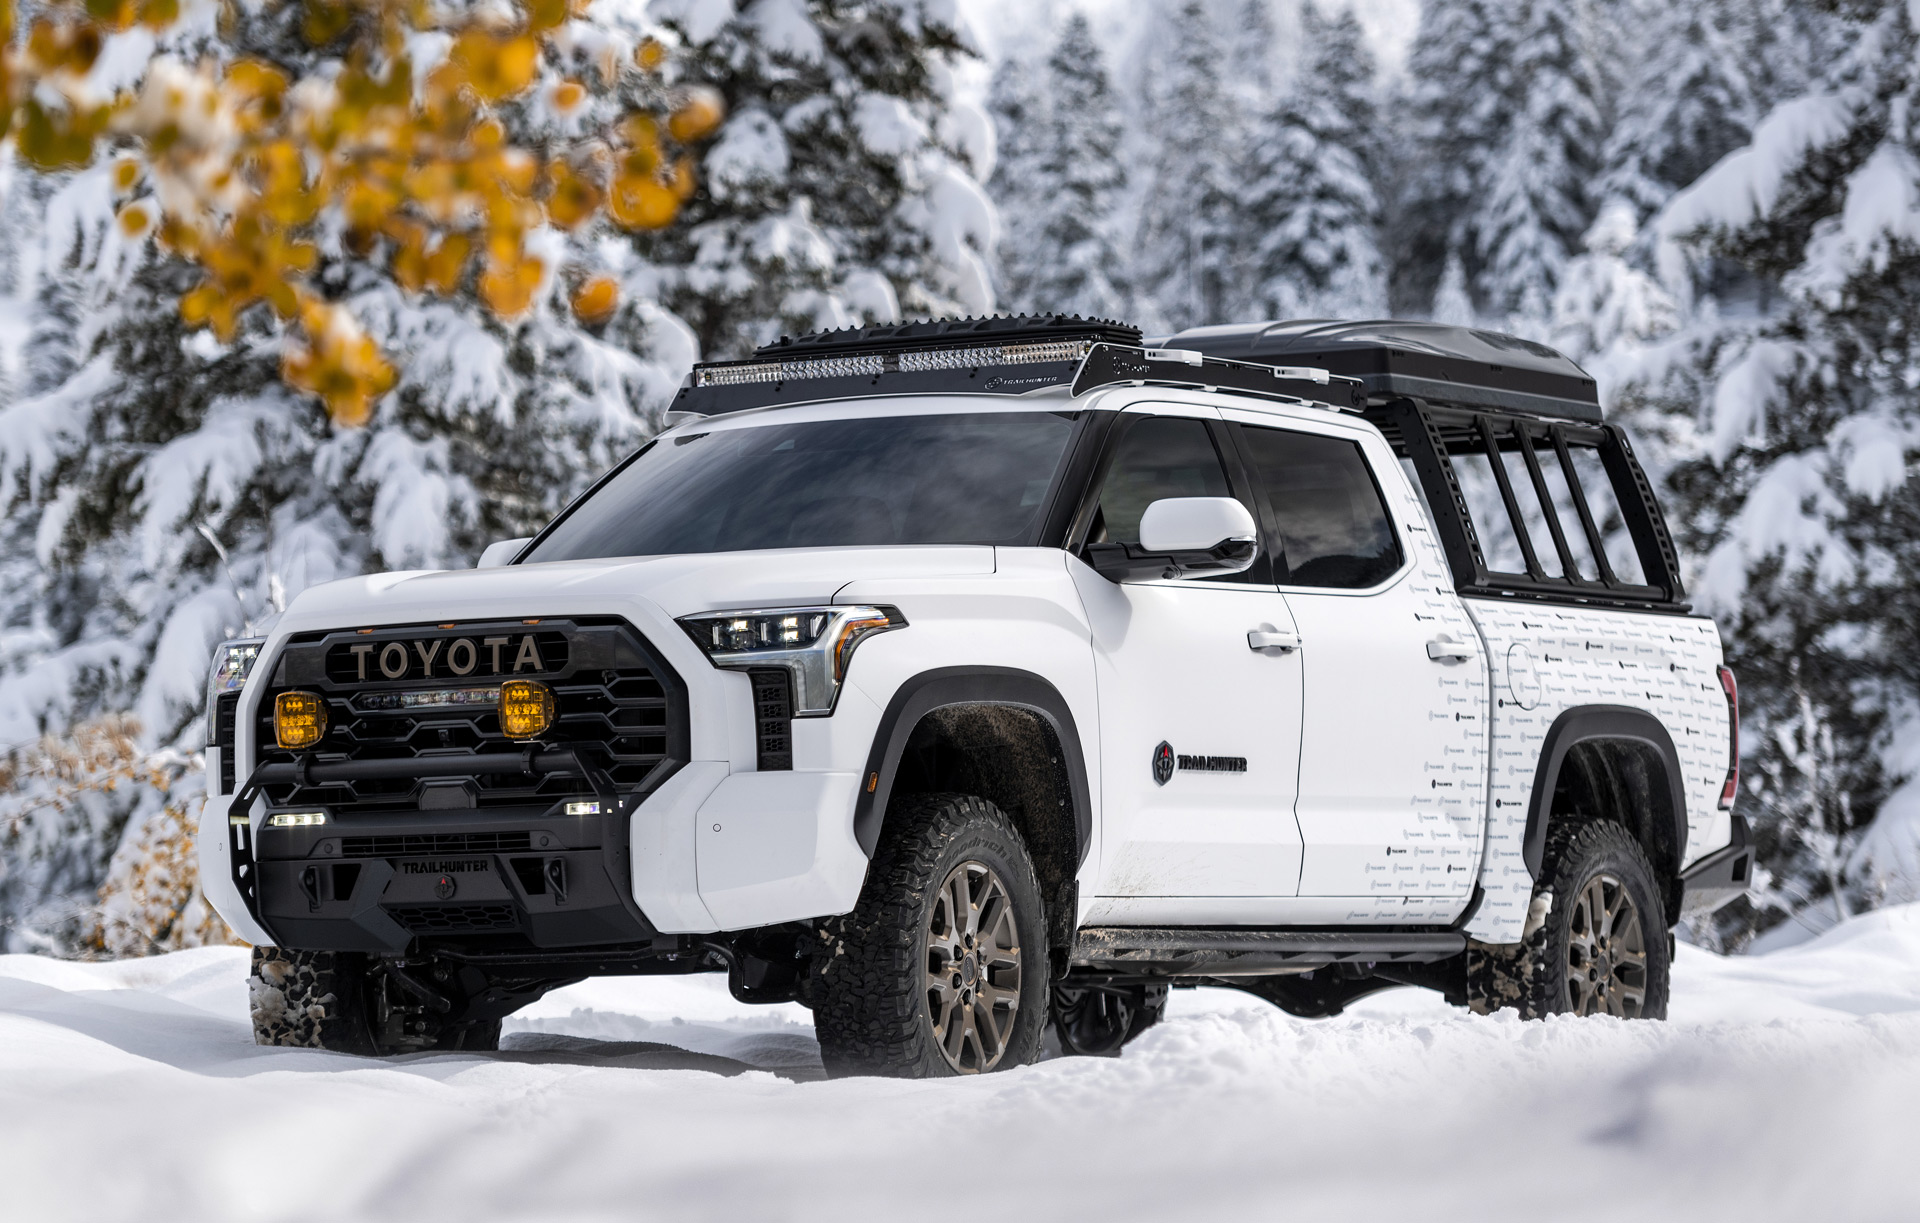 Why The 2024 Toyota Trailhunter Is The Smartest Idea, 55 OFF